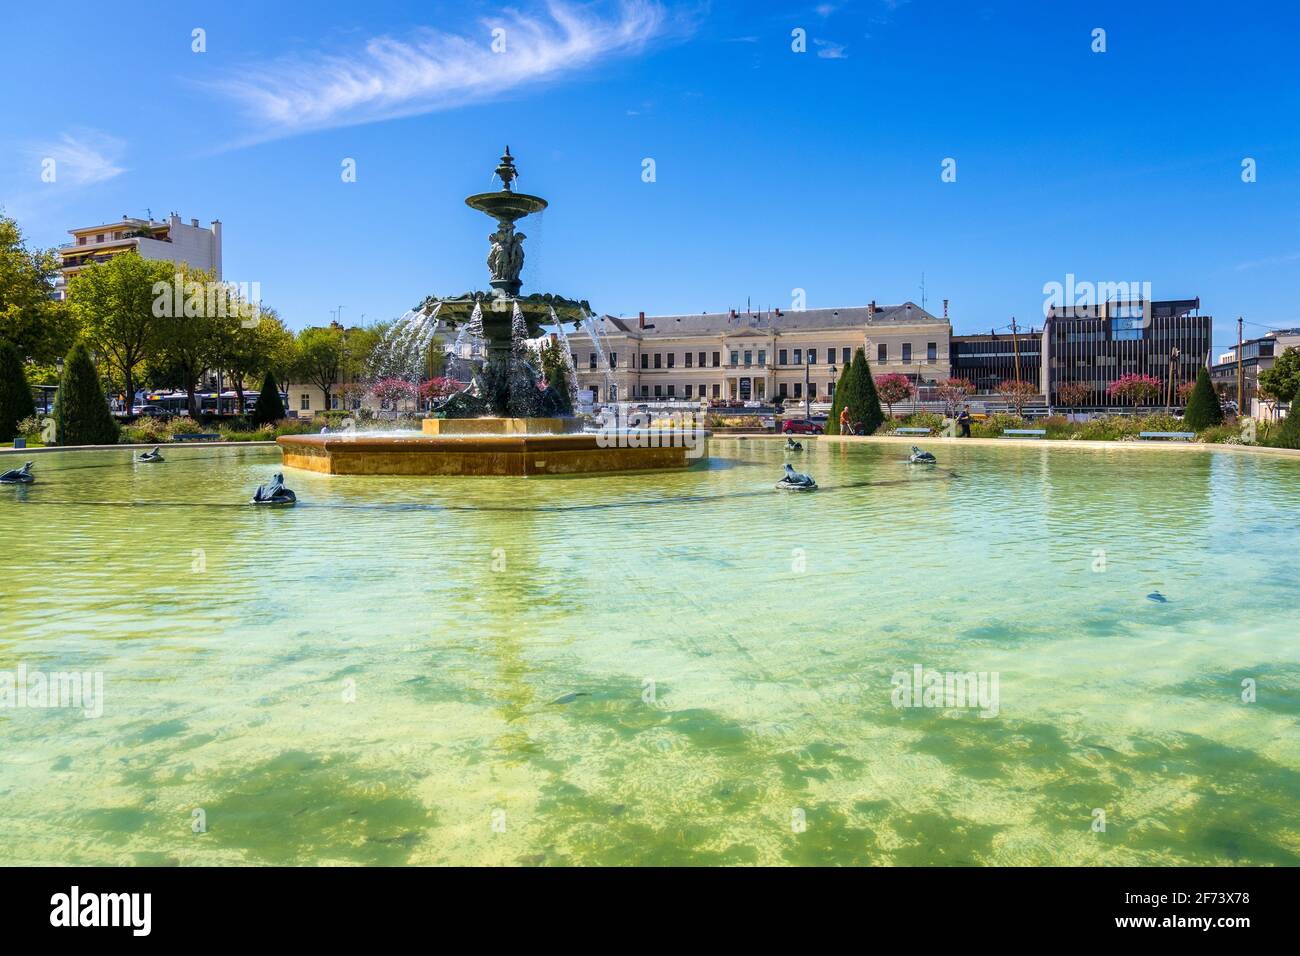 Angers, France - August 23, 2019: Fountain in Jardin du Mail. Mail Garden  is a public park in the city center of Angers in France Stock Photo - Alamy